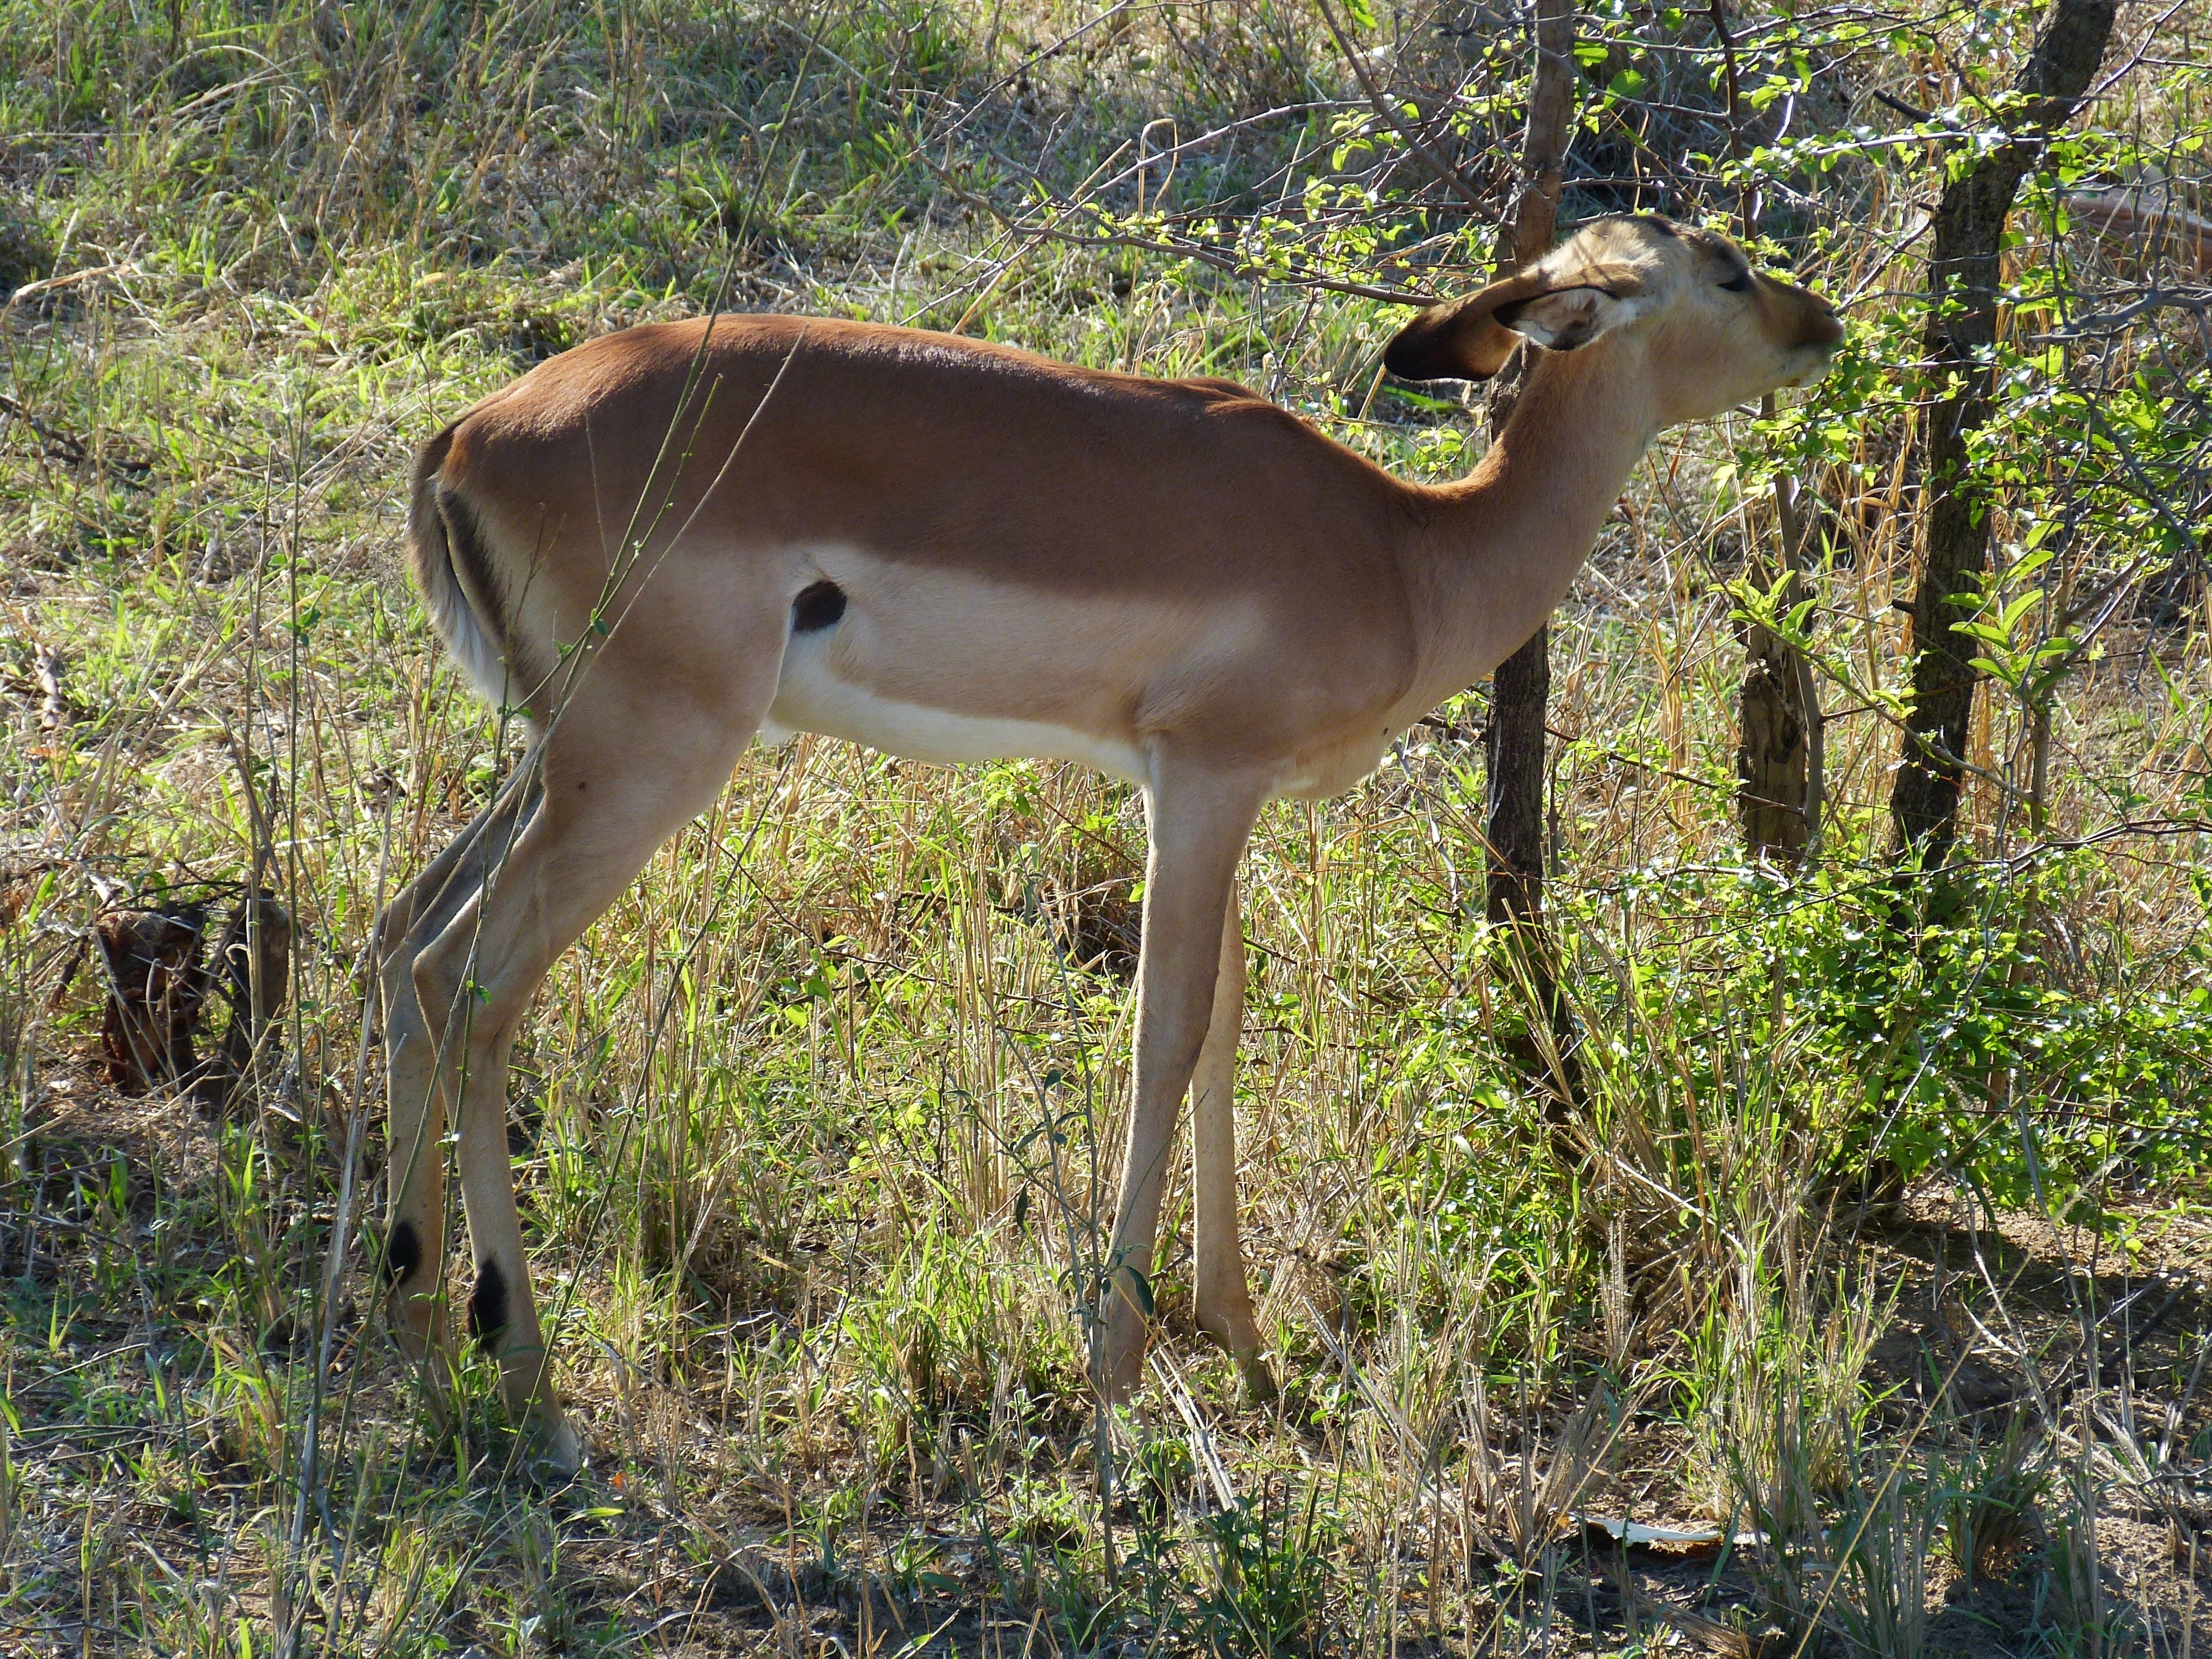 Steppe, South Africa, Antelope, Gazelle, one animal, animals in the wild